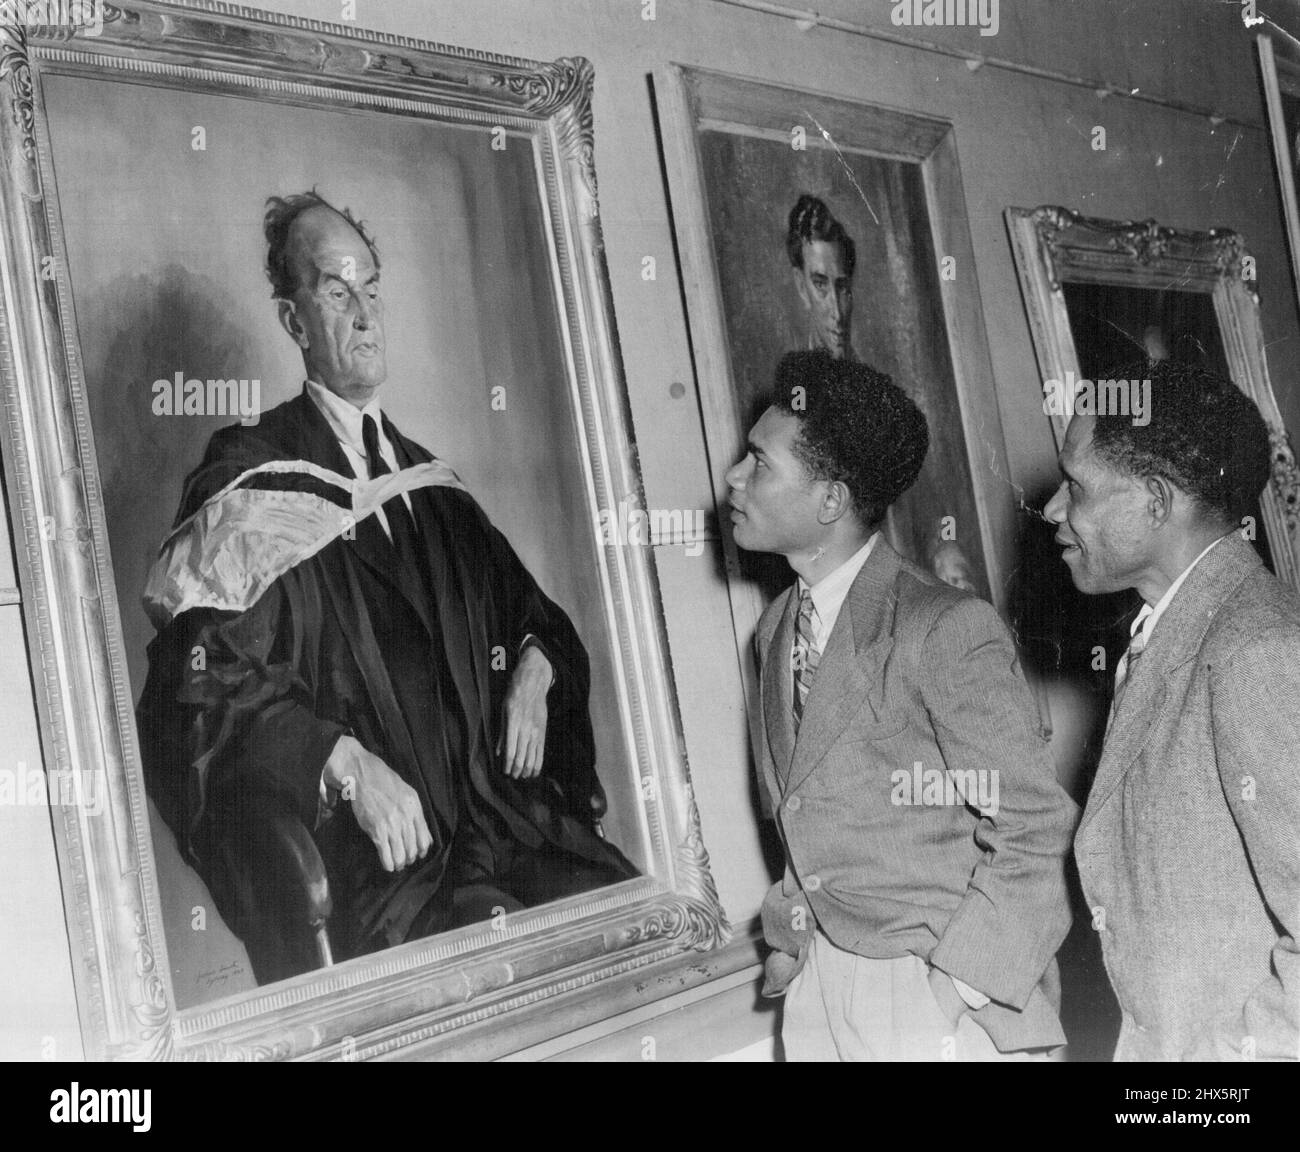 Penneli Anakapee inspect the Archibald prize entrants at the Aust Gallery ***** with the judies friendships about author ***** portrait burn thumbs down on Bill Dobell's portrait of Frank Clive - though both have met Dobell socially in Papua- and vote Joshua Smith's entry the best. March 01, 1950. Stock Photo